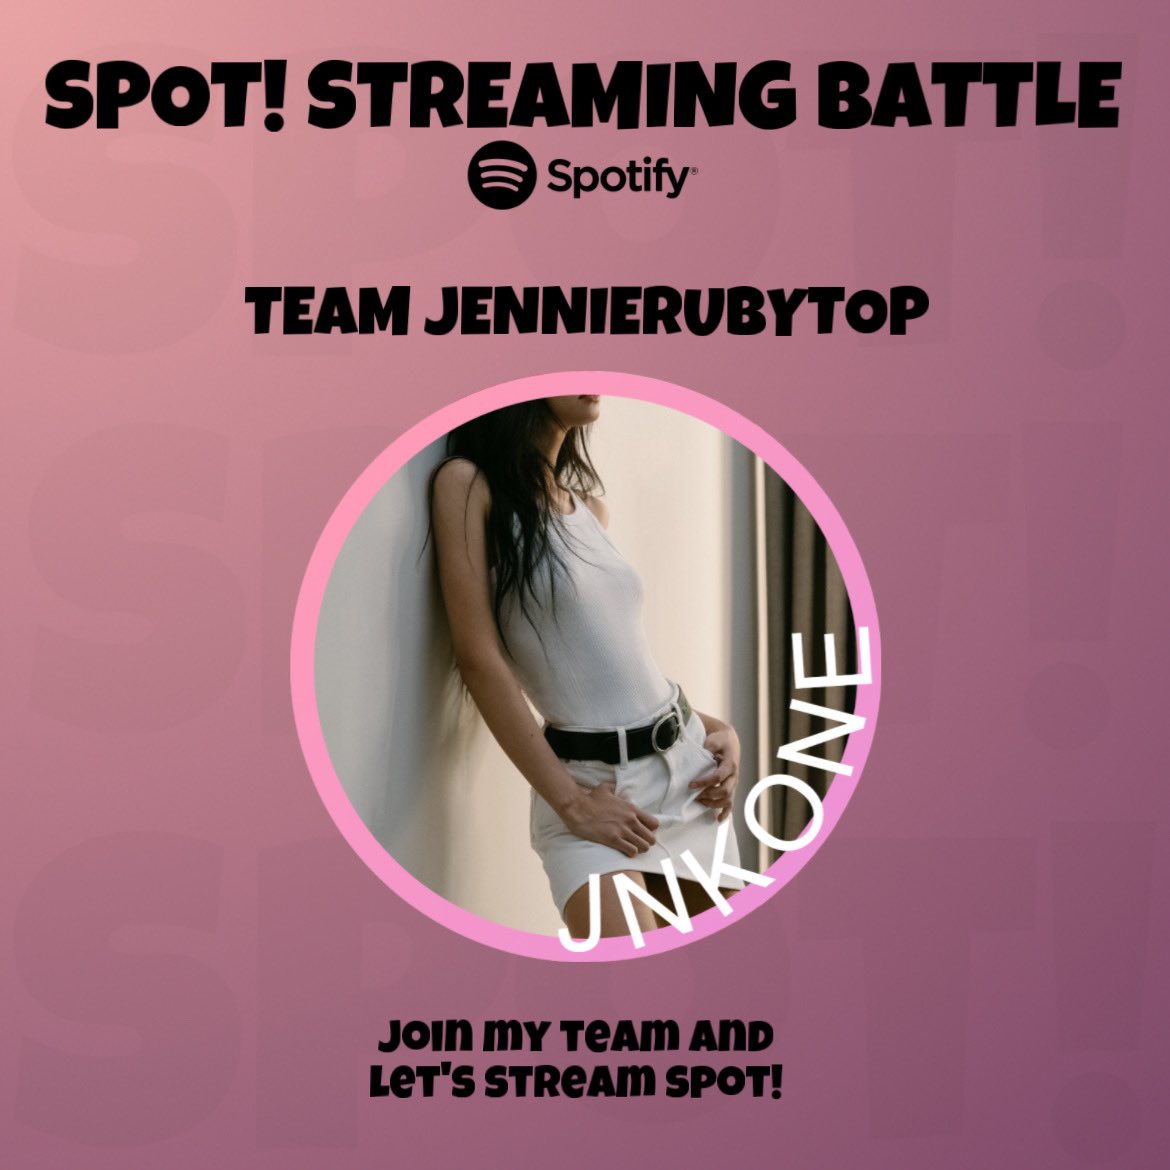 Hey TEAM @jennierubytop Let’s win the battle & let’s increase ‘SPOT’ streams on Spotify! Let’s get to the goal ASAP! Target: 500 #STREAM_SPOT #SPOTonSpotify